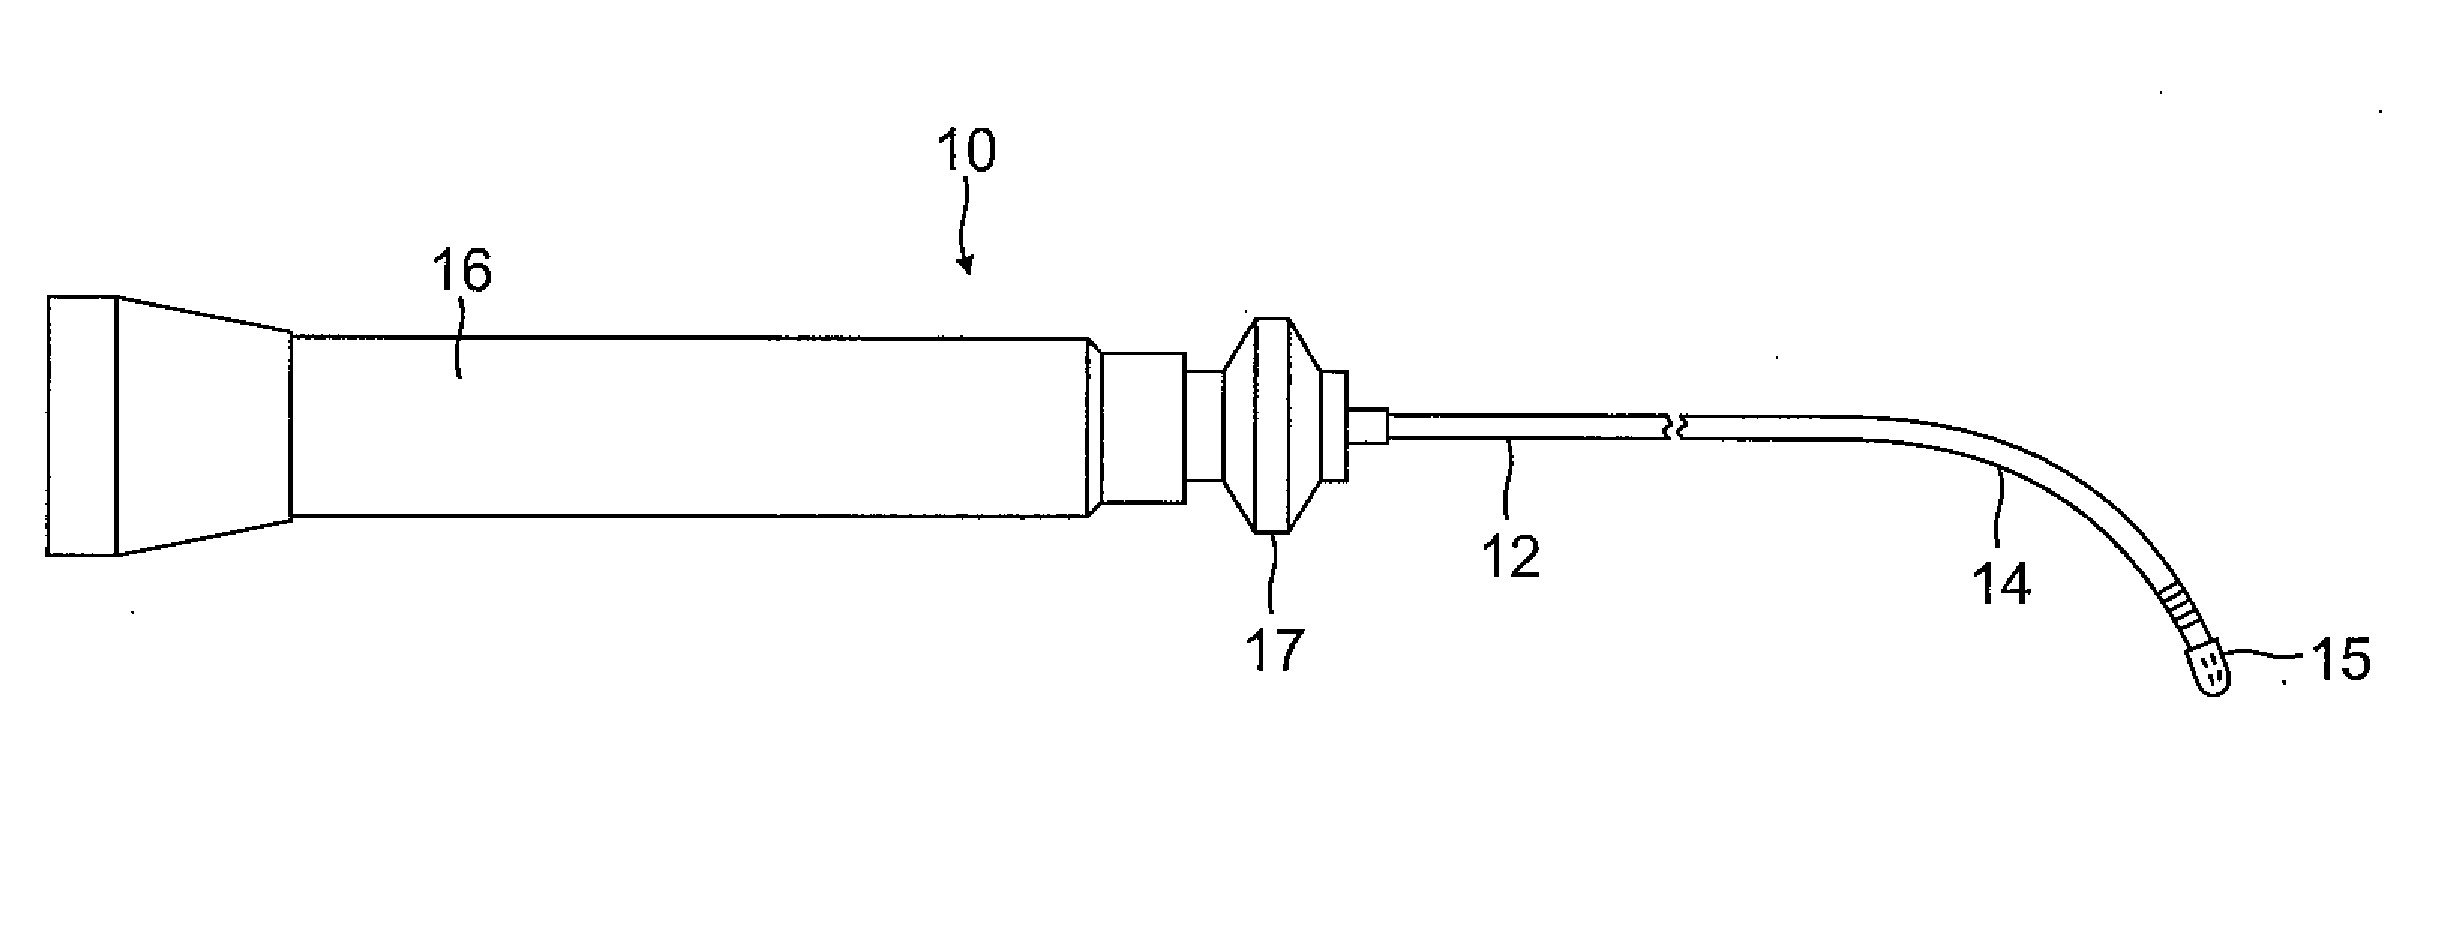 Catheter with irrigated tip electrode with porous substrate and high density surface micro-electrodes